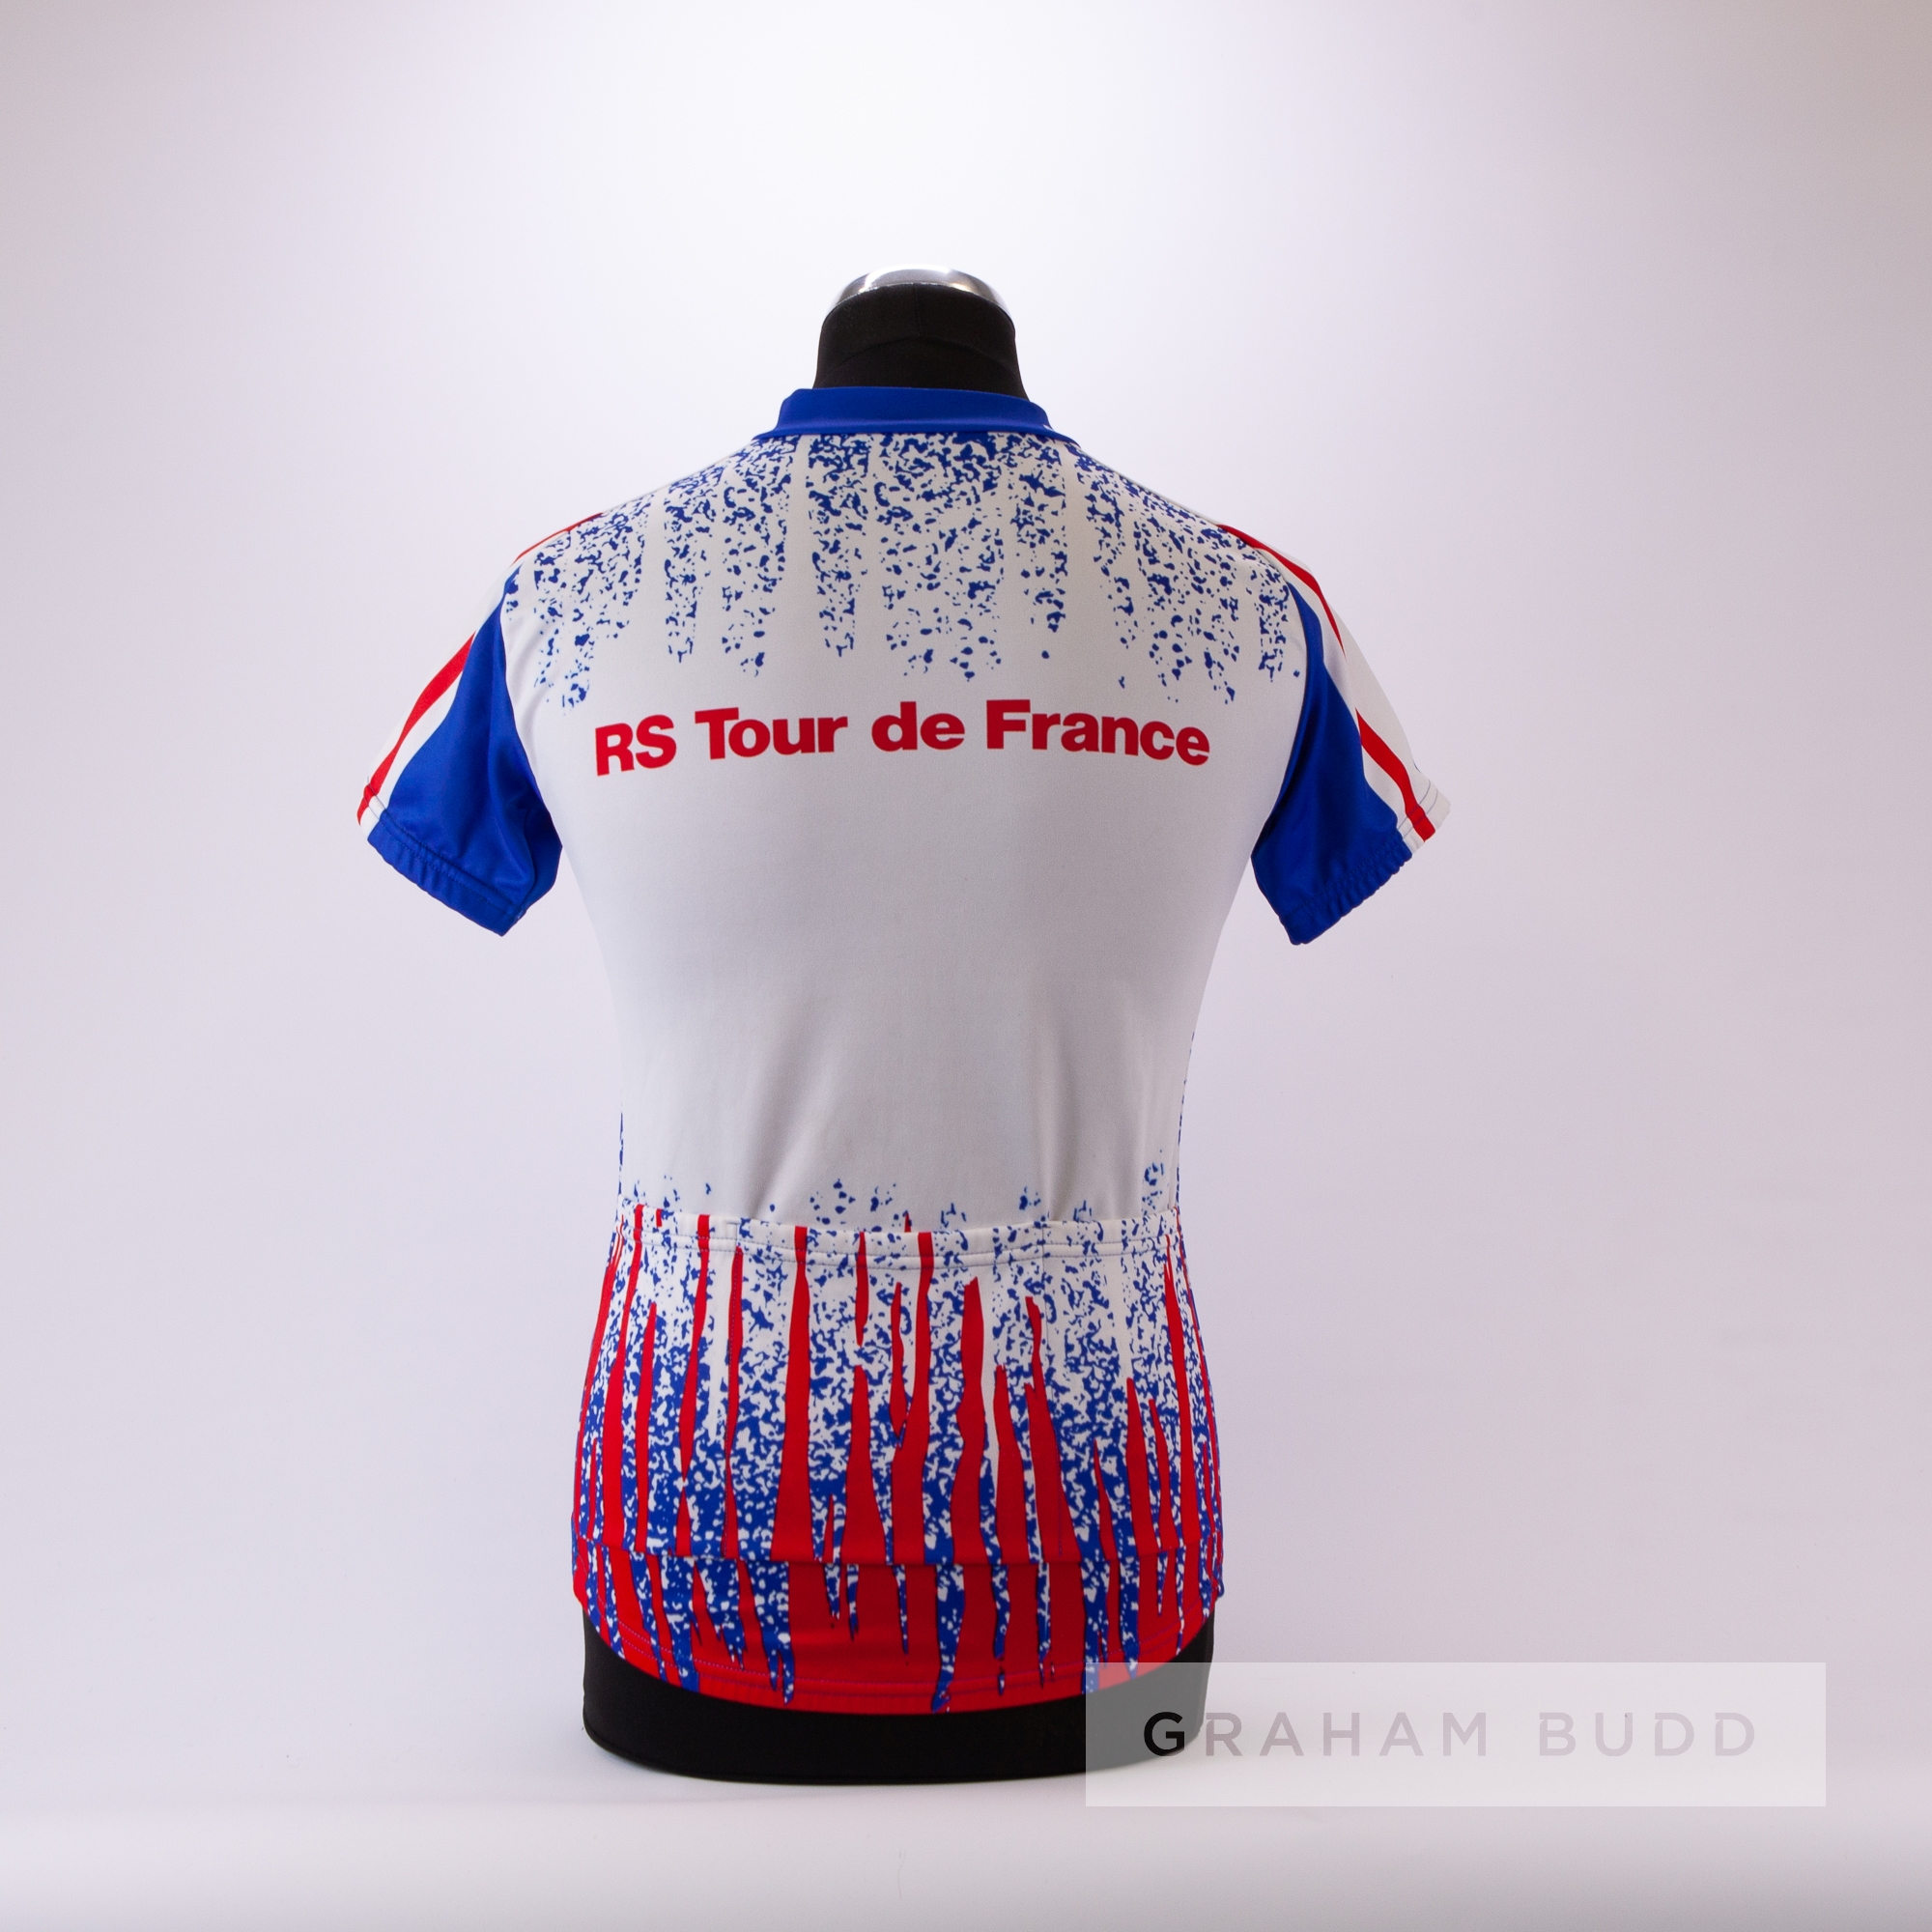 2000 white, red and blue Italian Biemme Radio Spares Tour de France Cycling race jersey,  scarce, - Image 4 of 4